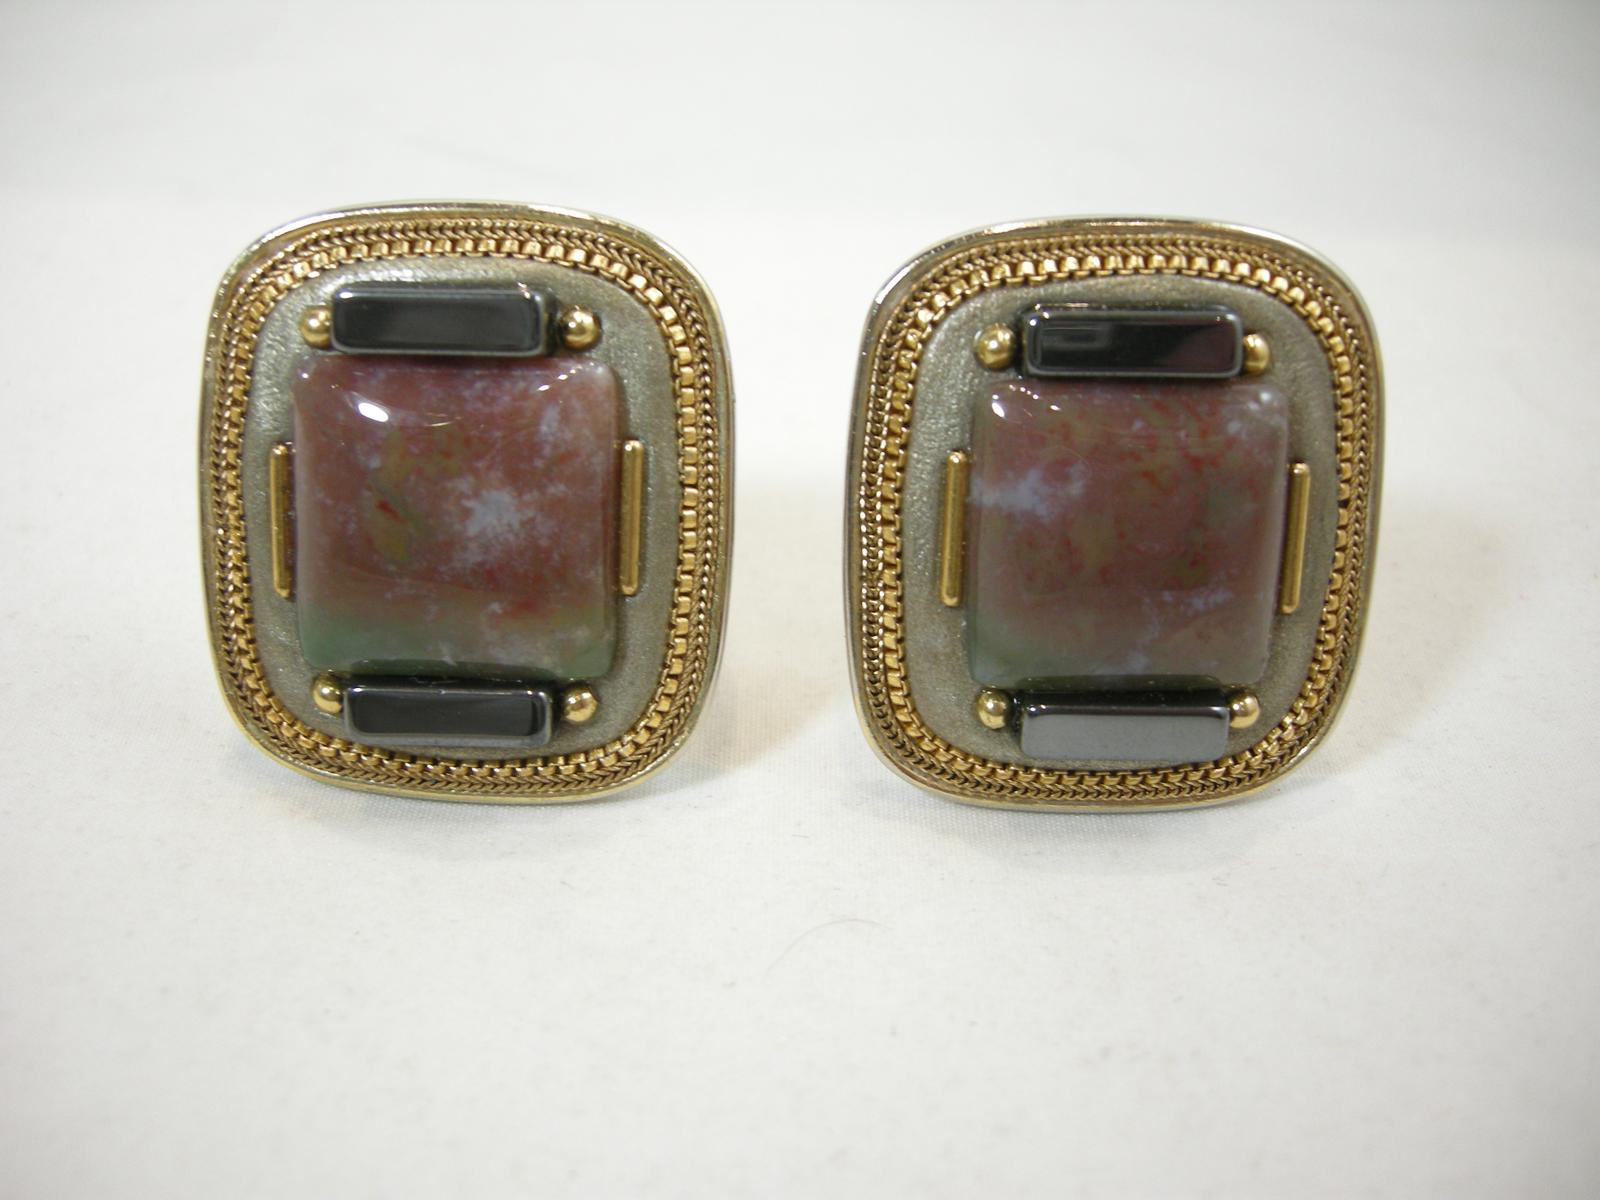 These vintage signed Michal Golan earrings has a marbleized center stone with hematite and enamel accent in a gold tone setting.  In excellent condition, these clip earrings measure 1-1/2” x 1-1/4” and are signed “Michal Golan”.